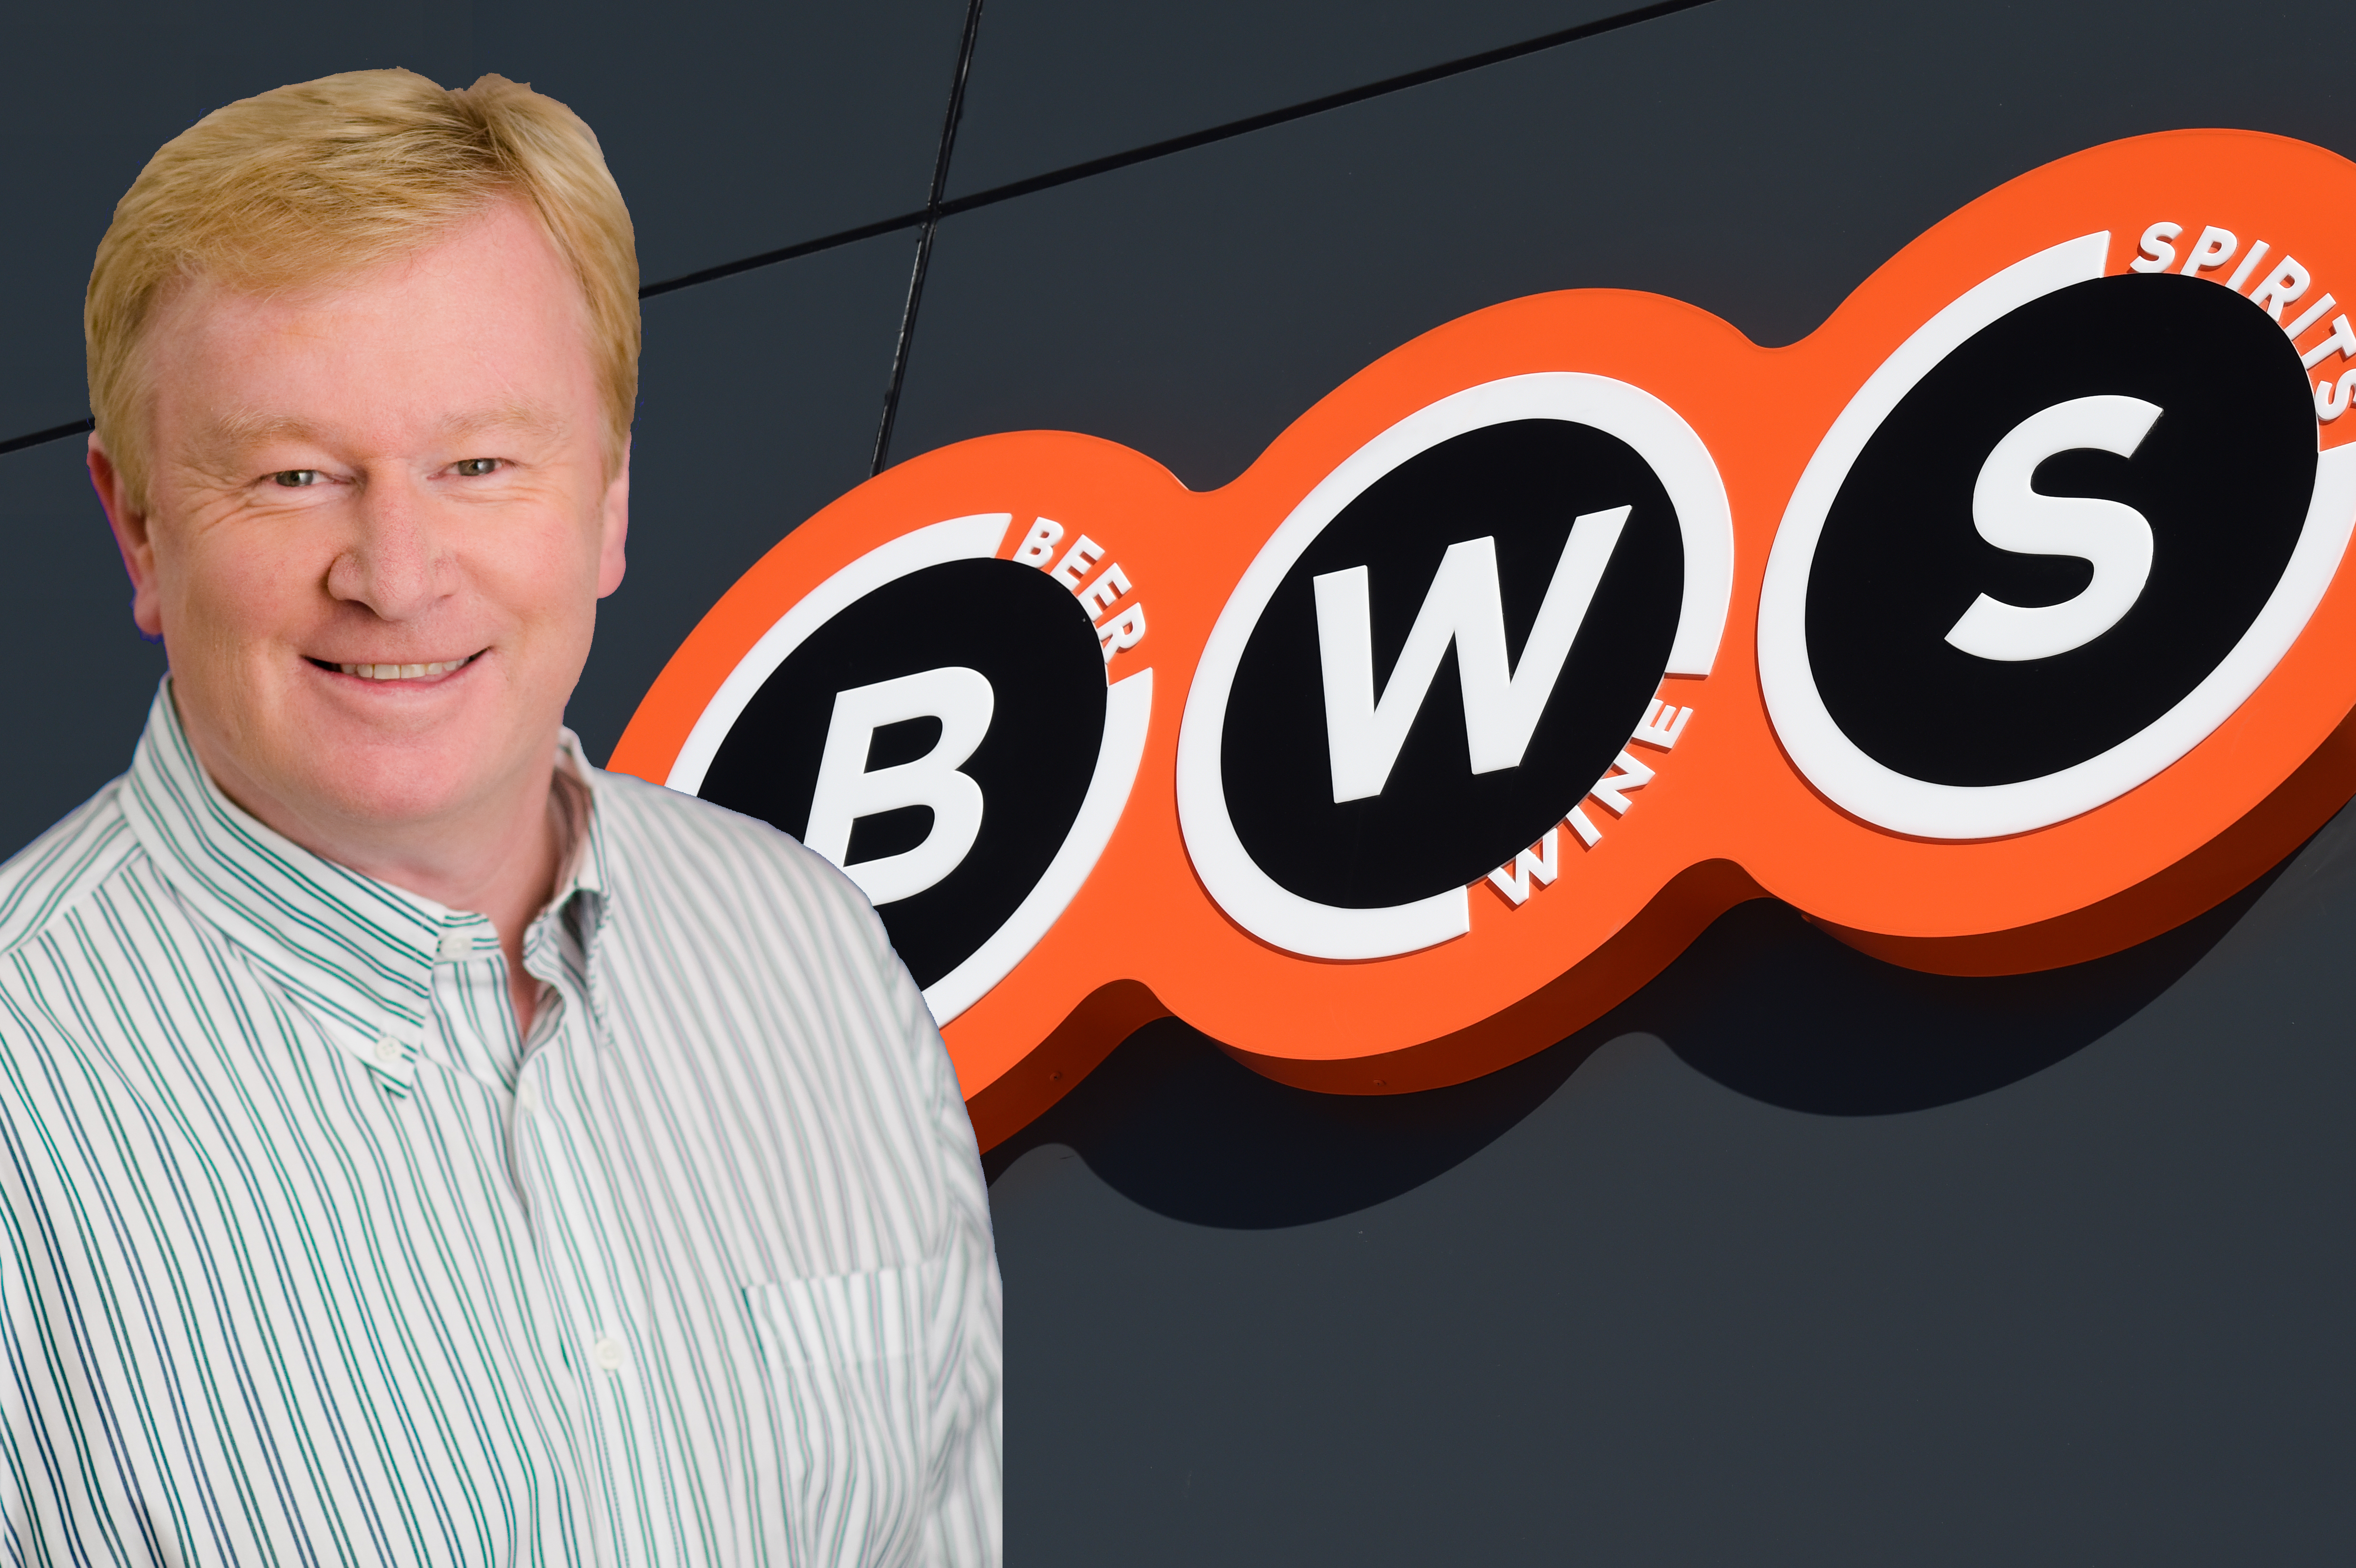 Article image for Denis Walter says the partnership between BWS and Dry July ‘just seems wrong’